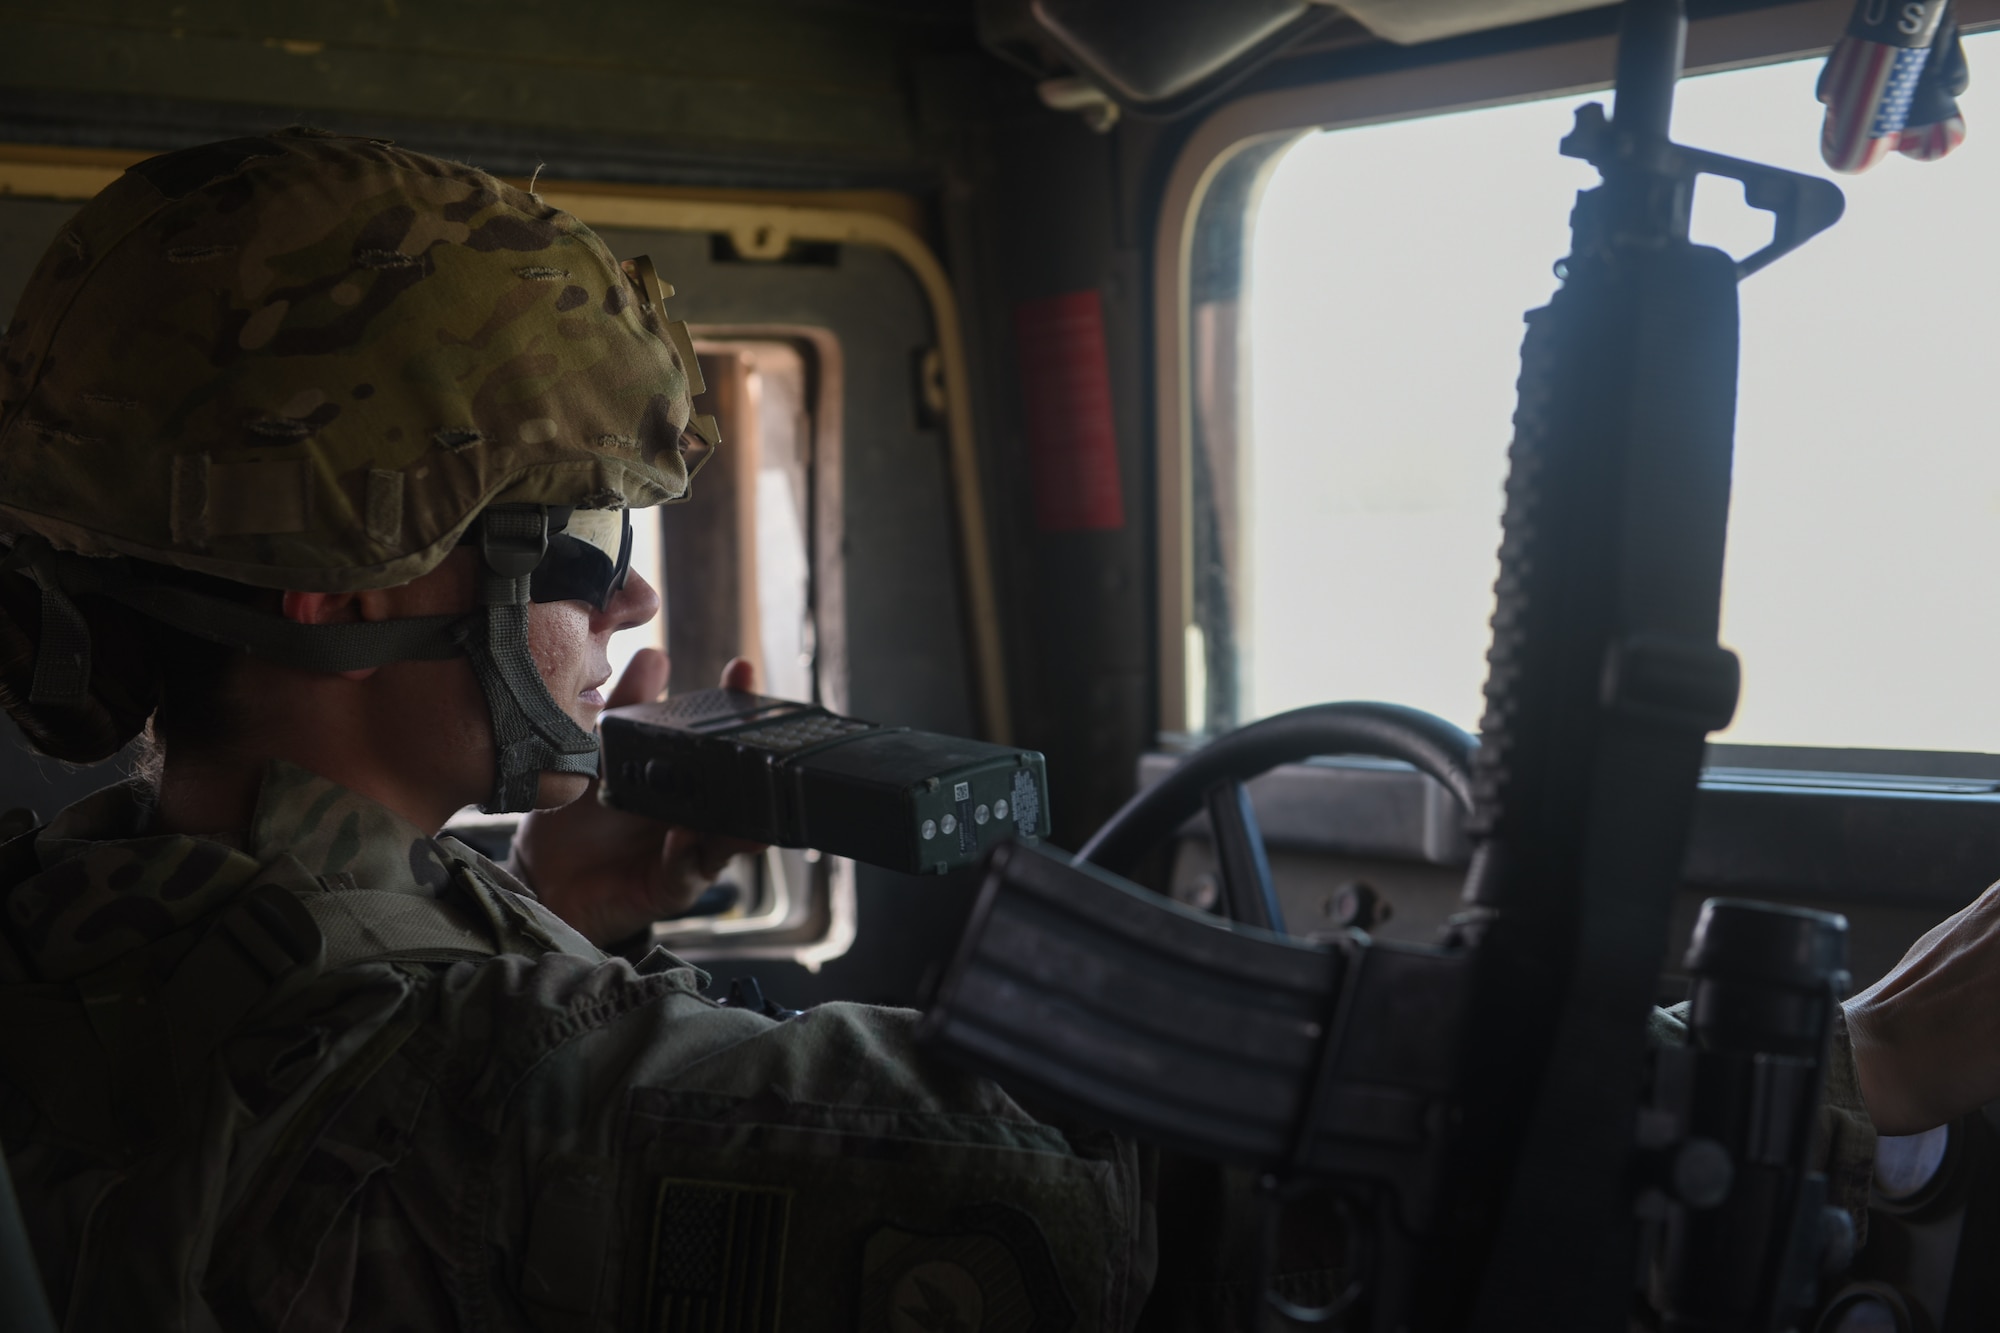 U.S. Air Force Master Sgt. Shannon Hawkins, an airfield manager deployed in support of Combined Joint Task Force – Operation Inherent Resolve and assigned to the 370th Air Expeditionary Advisory Group, Detachment 1, communicates with air traffic controllers over the radio in a Humvee at Qayyarah West Airfield, Iraq, July 2, 2017. To ensure seamless control of both Iraqi and Coalition air traffic, the U.S. Air Force’s 370th supports the CJTF-OIR advise and assist mission by having a small team of air advisors at Qayyarah West airfield working alongside the Iraqis advising and assisting in day-to-day airfield operations. CJTF-OIR is the global Coalition to defeat ISIS in Iraq and Syria. (U.S. Air Force photo by Tech. Sgt. Jonathan Hehnly)